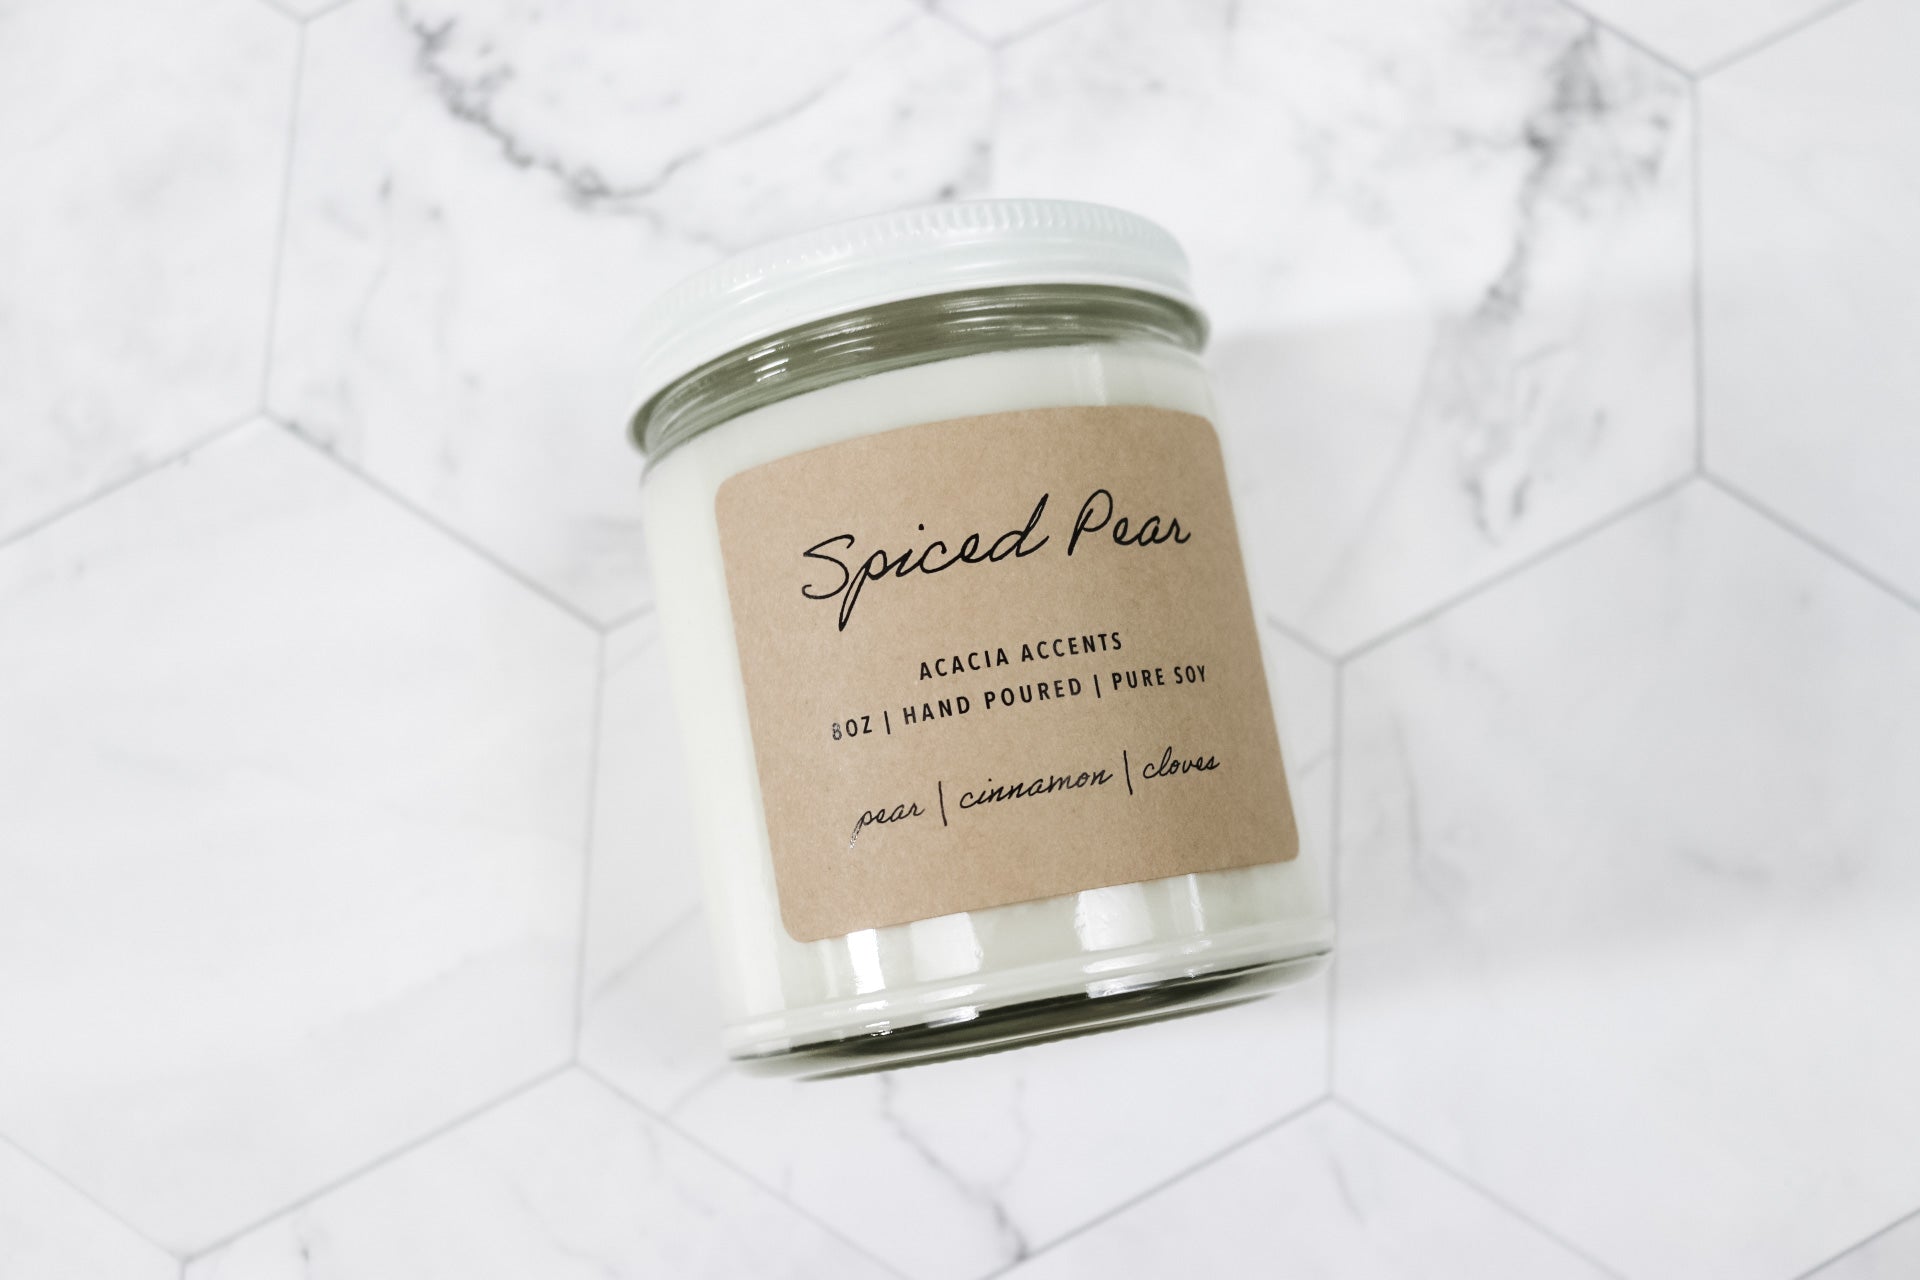 Acacia Accents Spiced Pear Candle - Renegade Revival